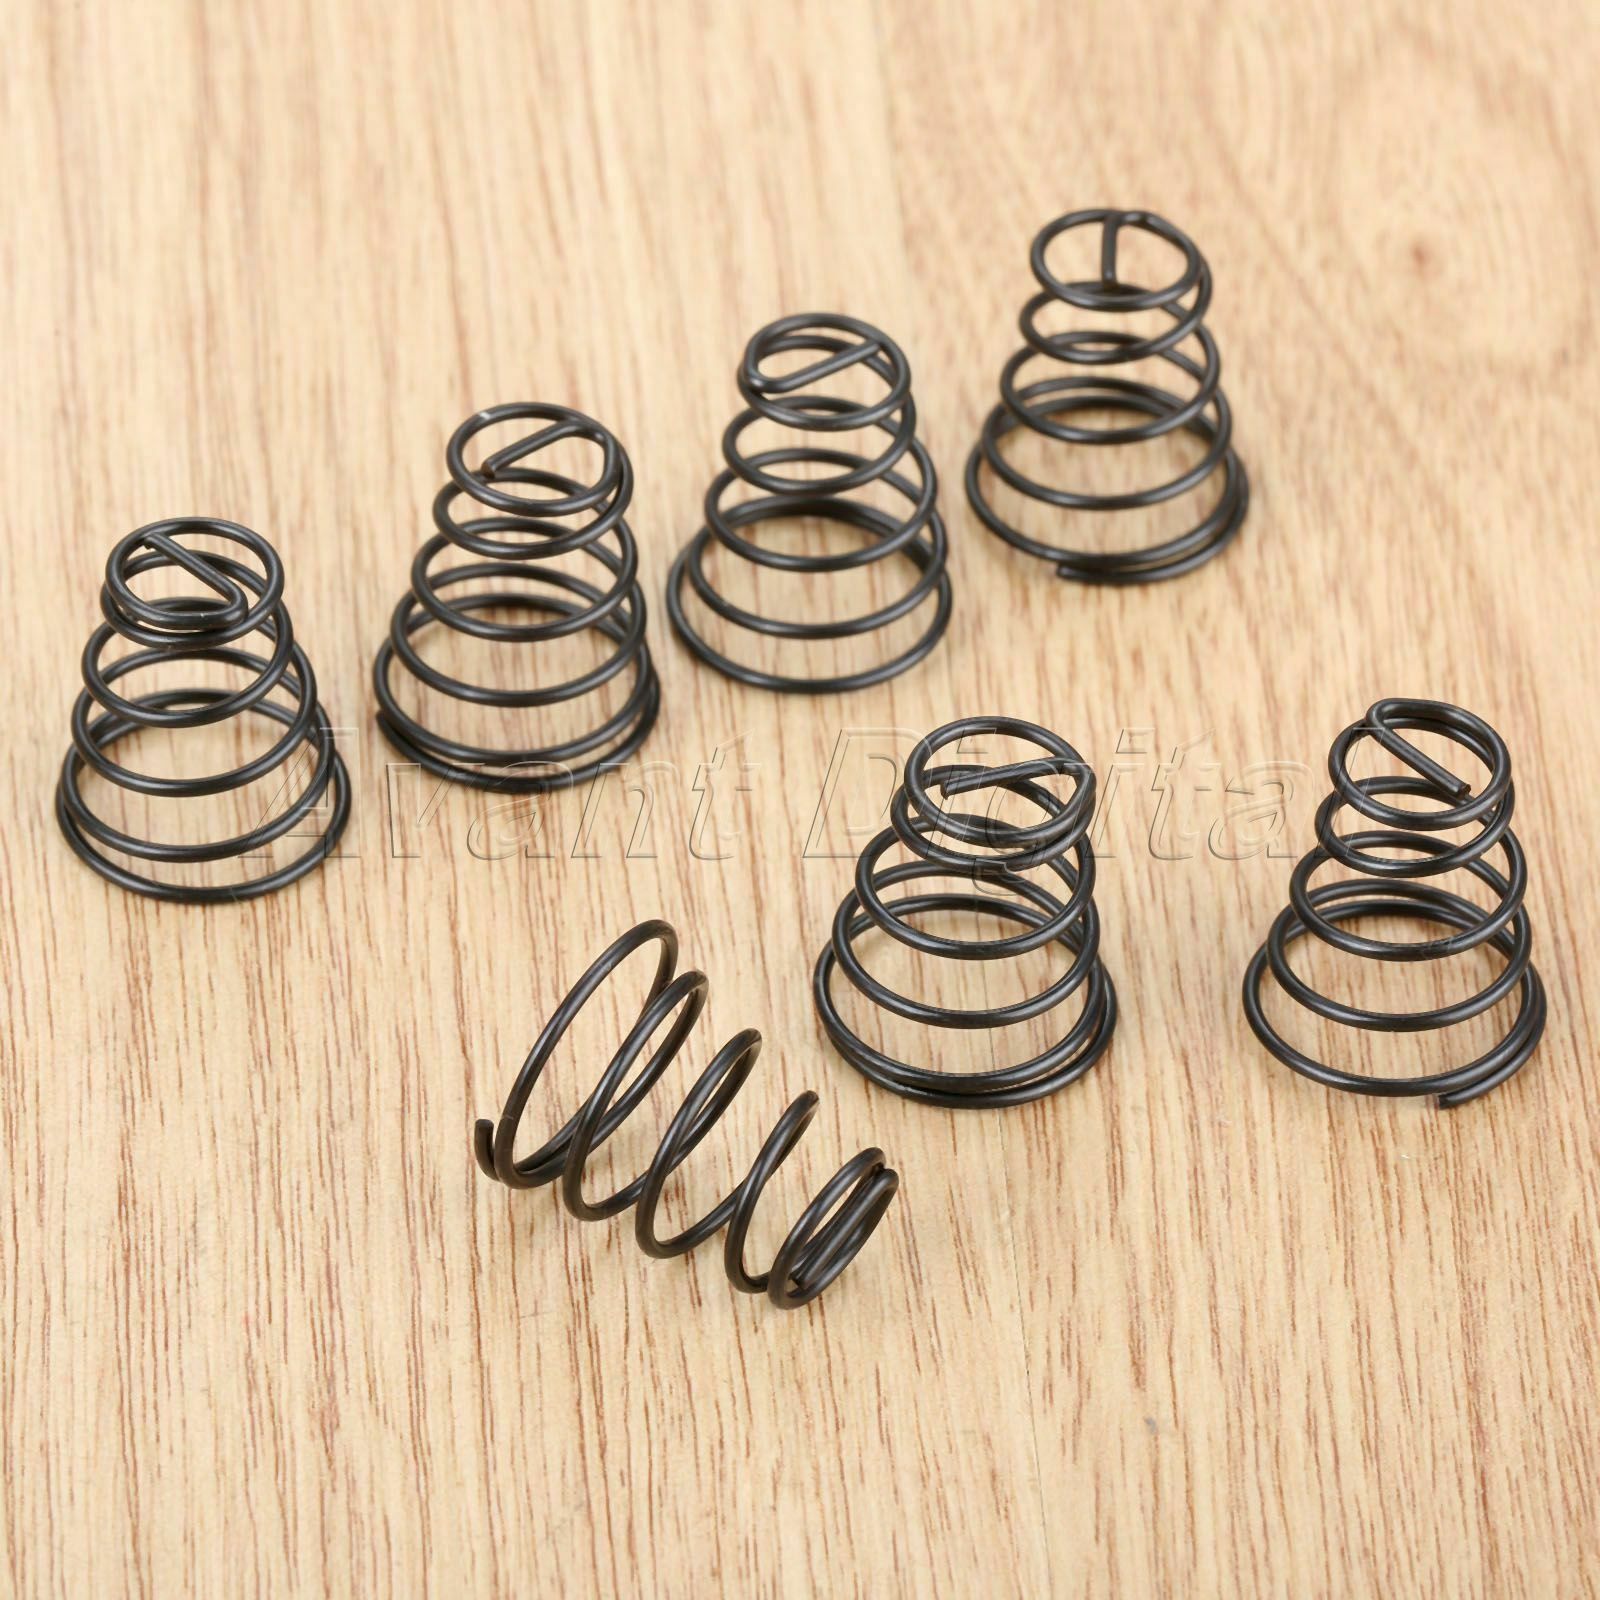 20Pcs Iron Spring Turnbuckles Sewing Machine Spare Parts Thread Tension Springs